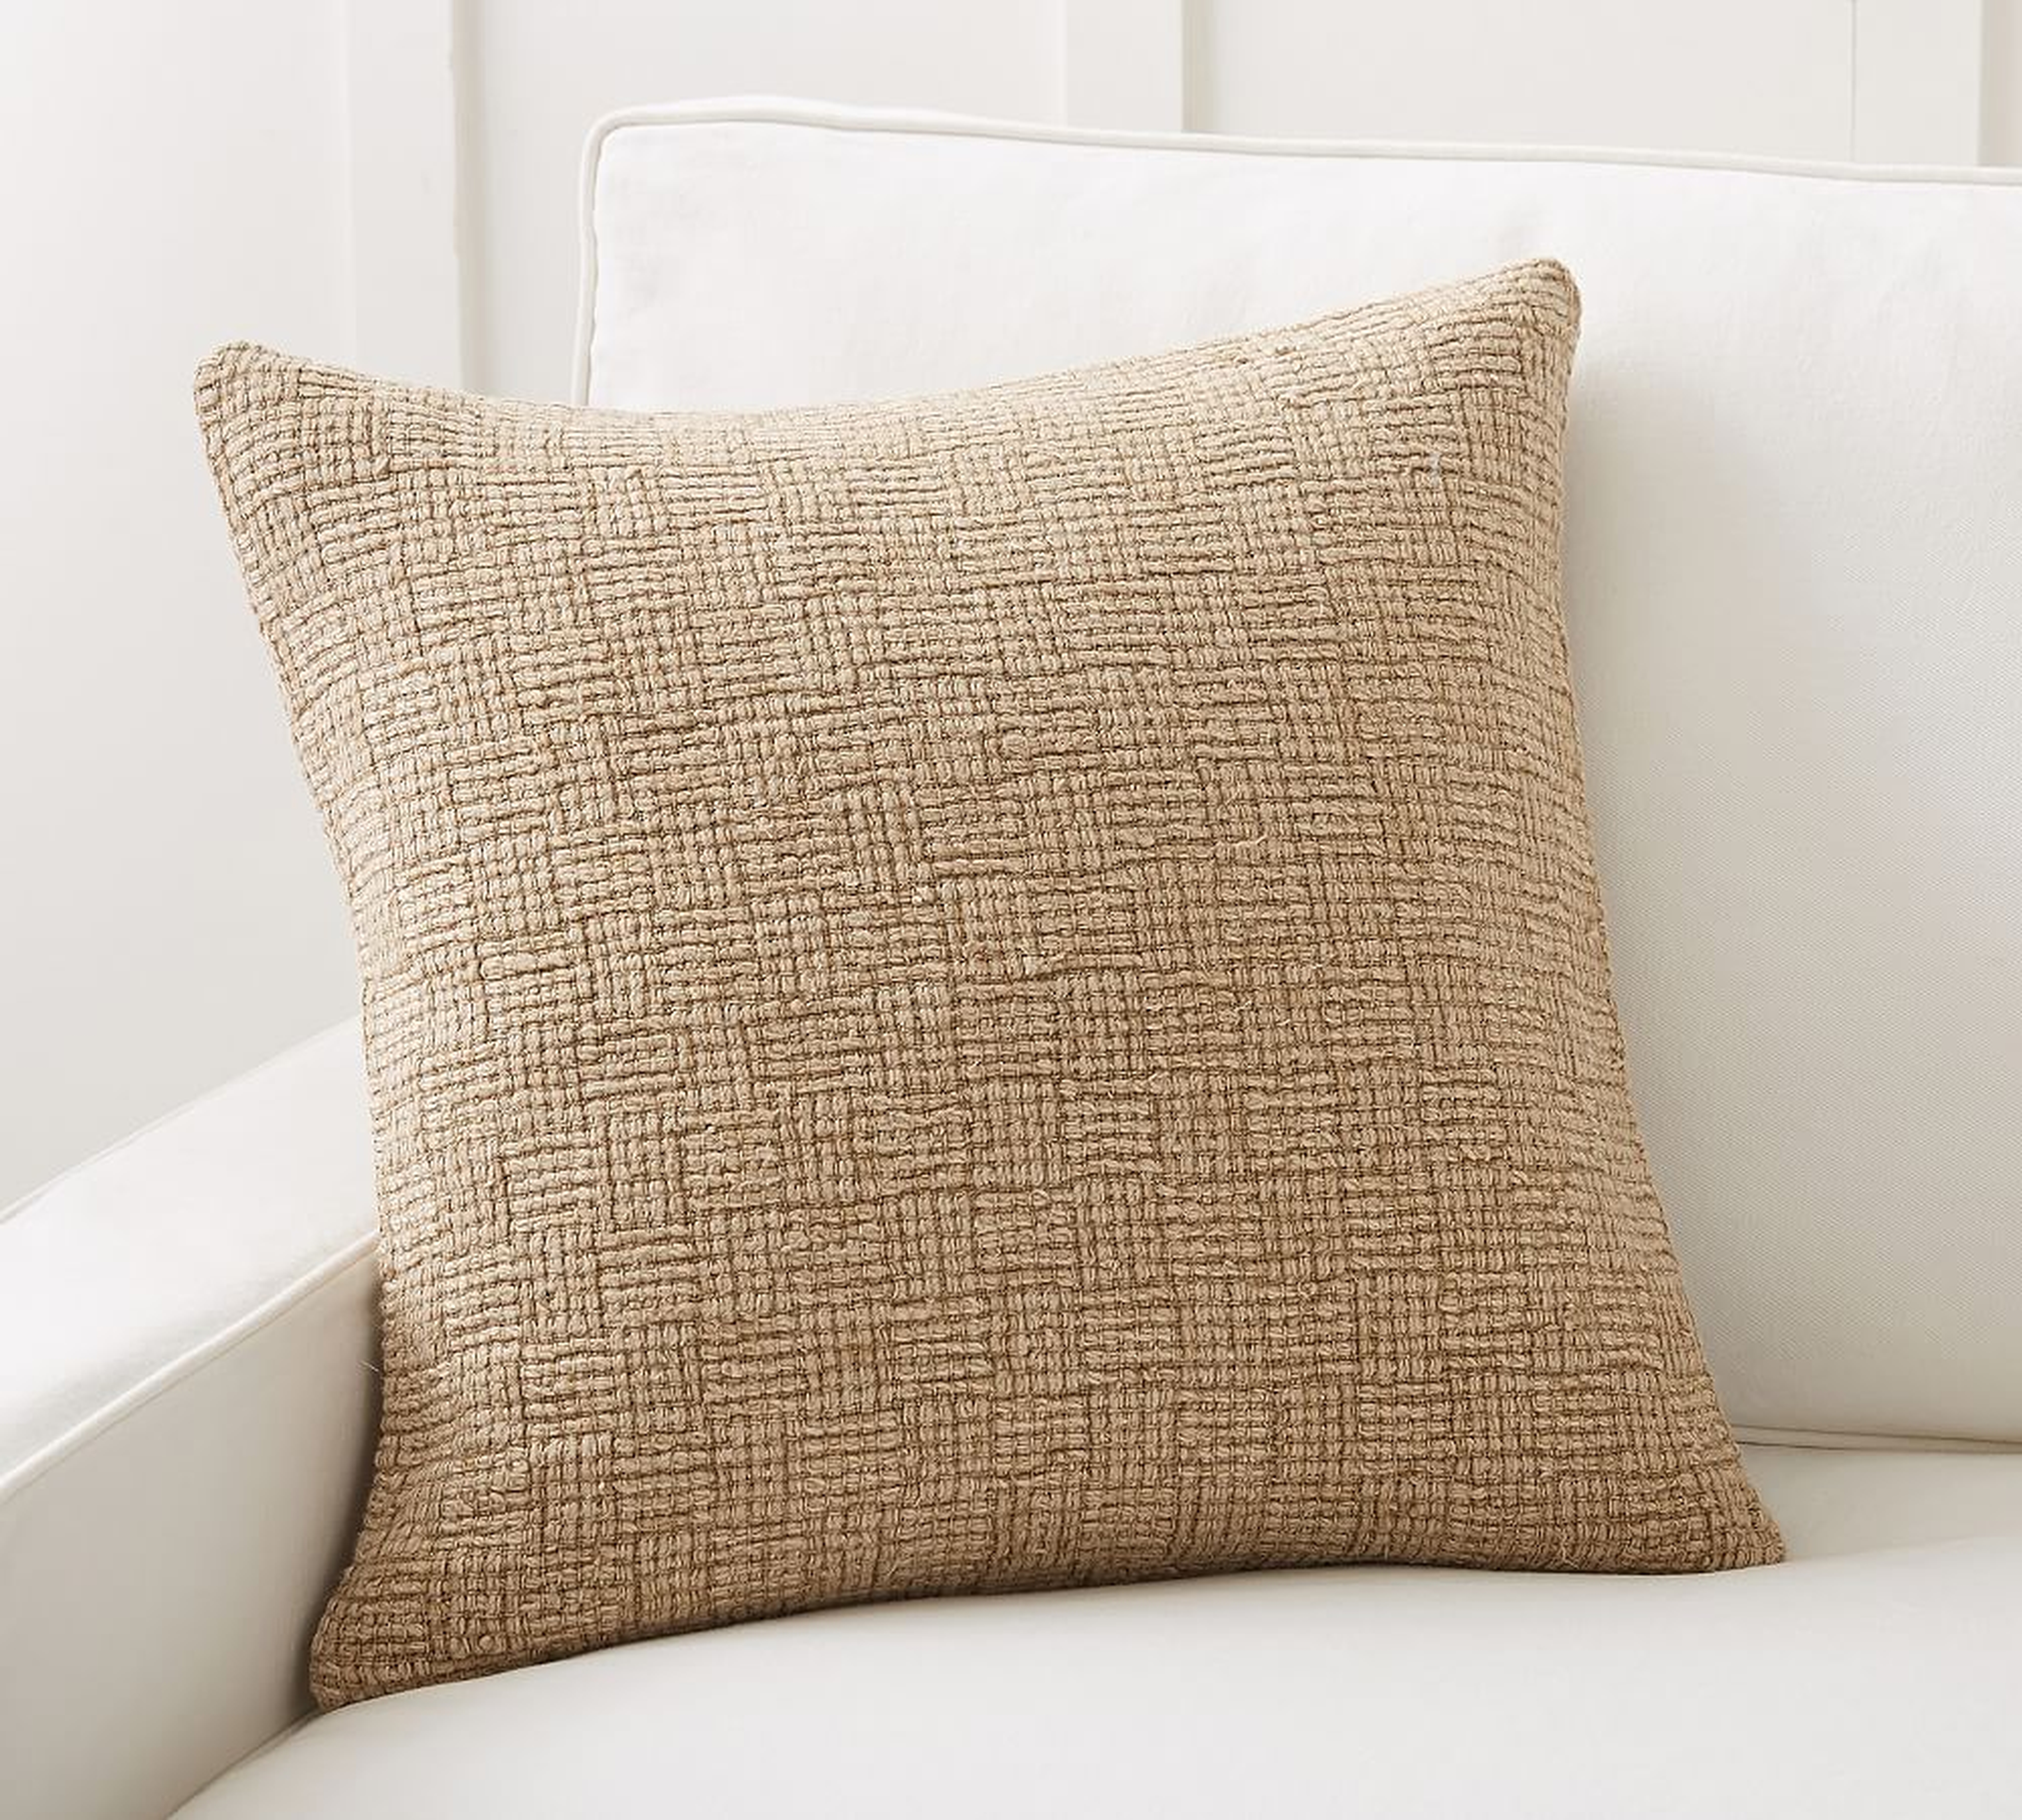 Ivy Linen Textured Pillow Cover, 22 x 22", Straw - Pottery Barn